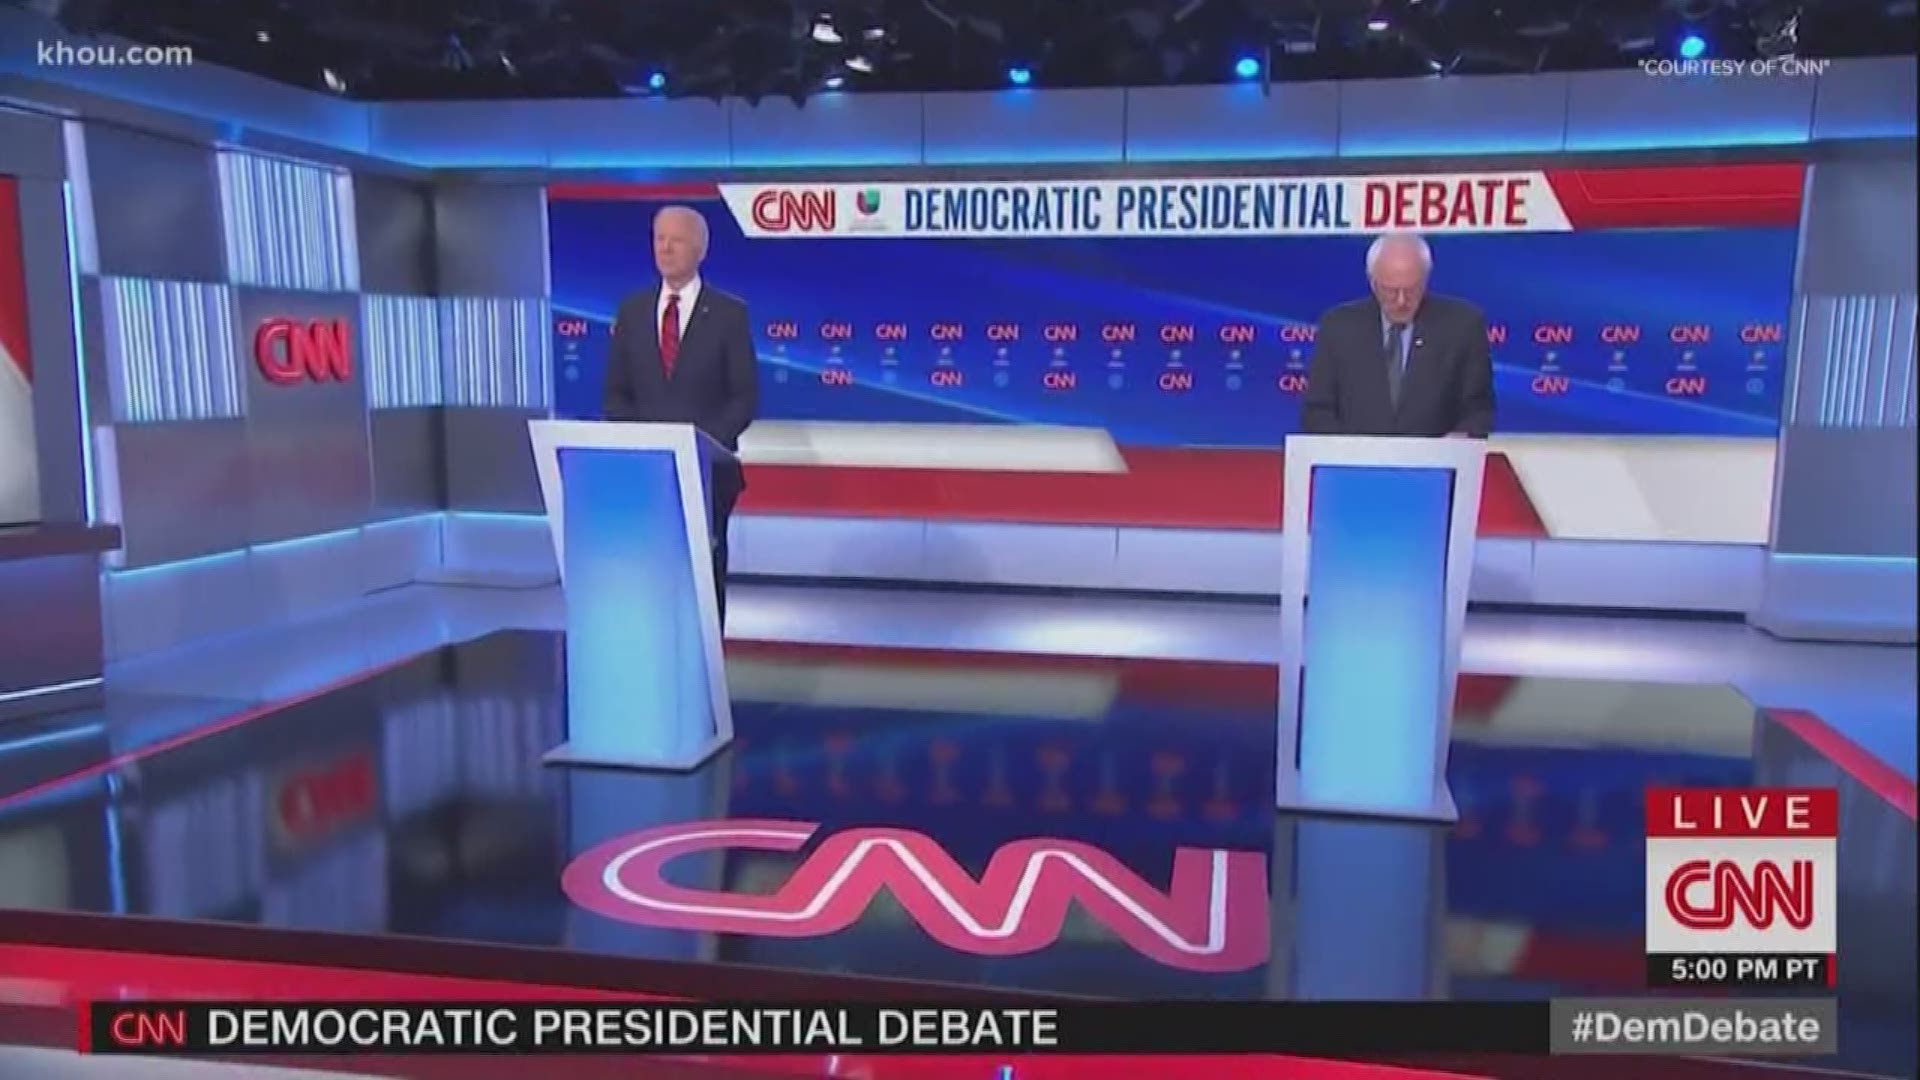 It's the first Democratic debate in two-and-a-half weeks, and the first since Biden took command of the primary race.